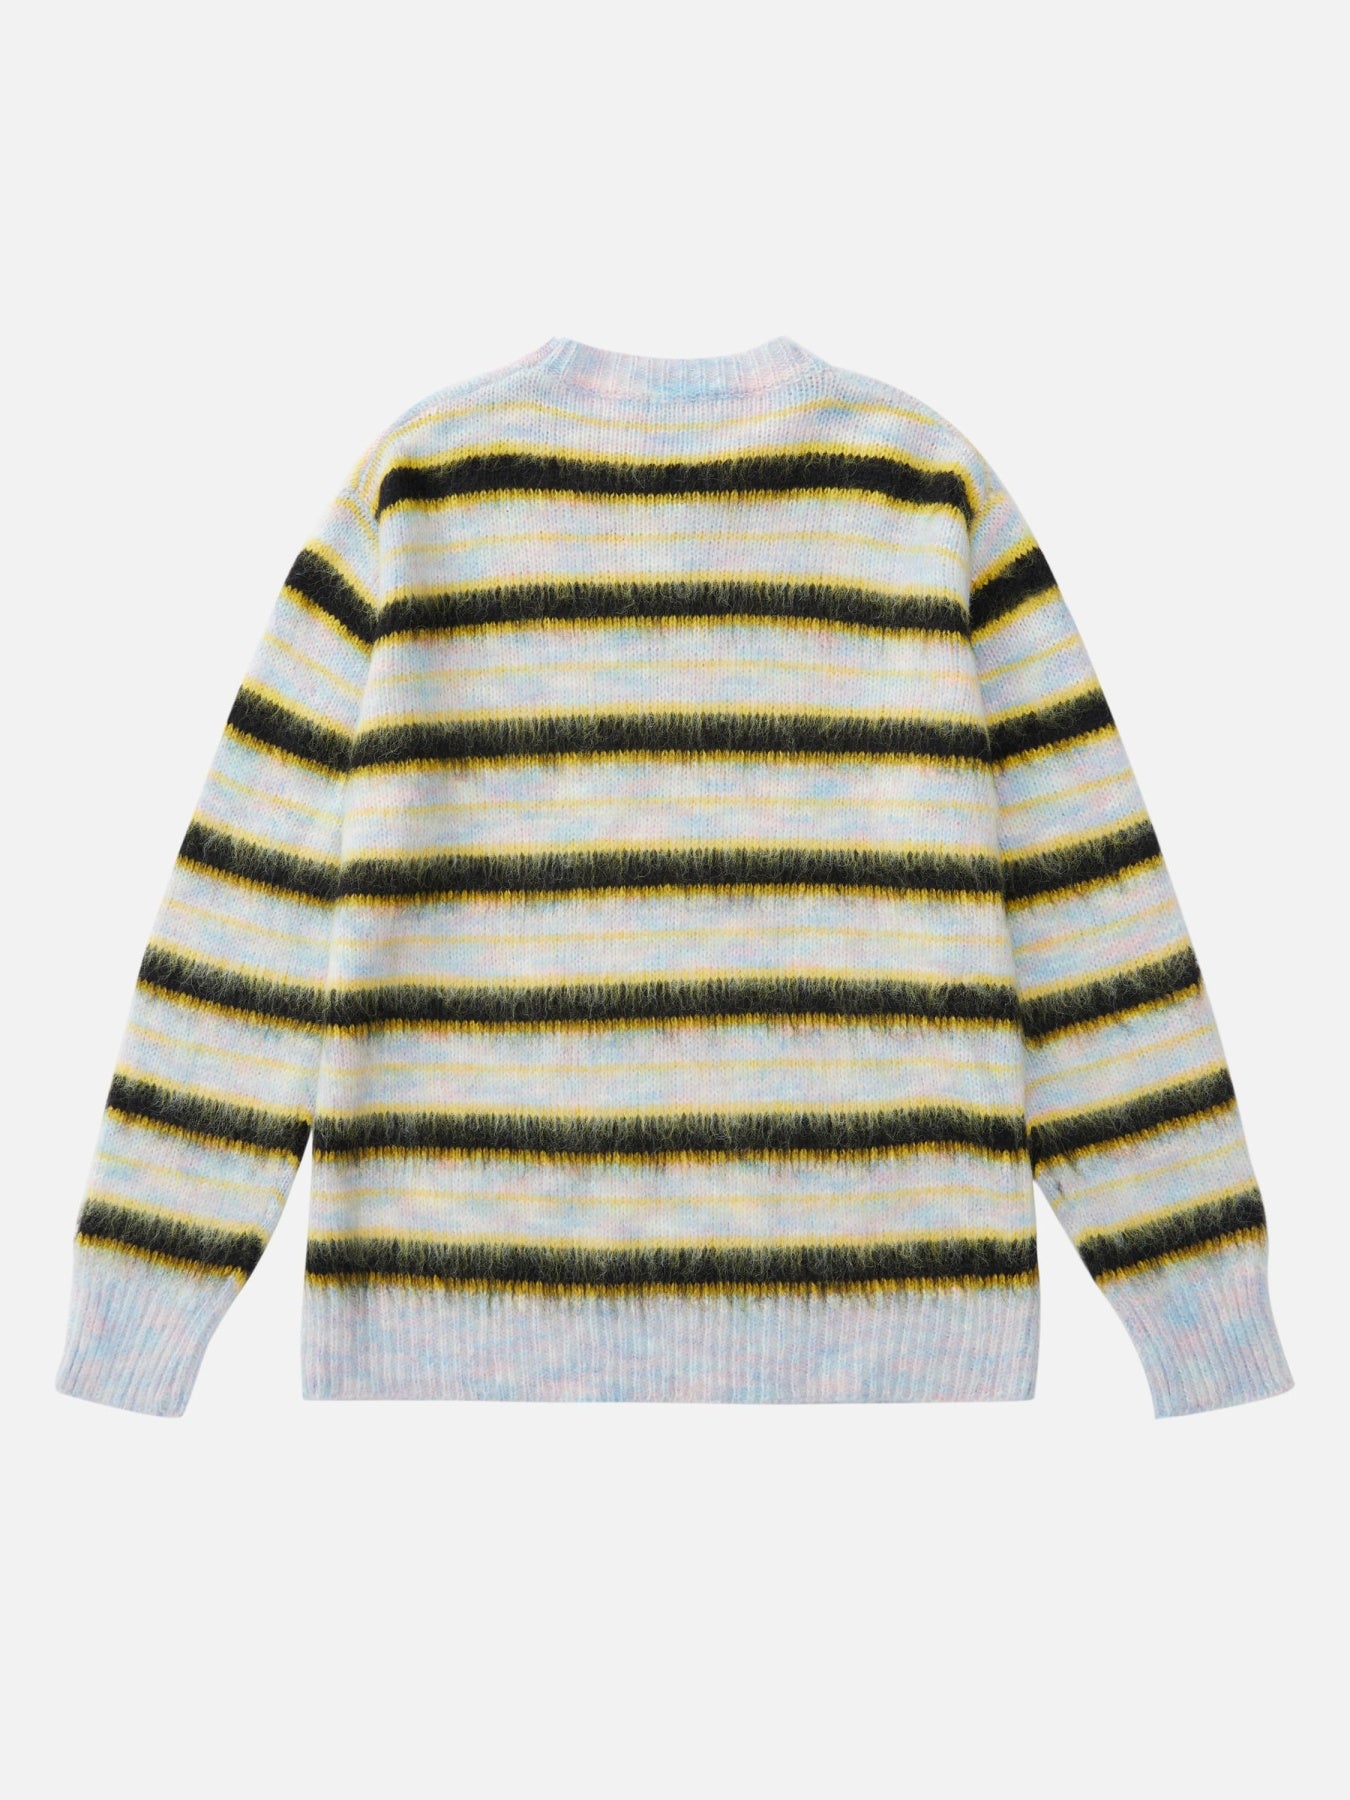 The Supermade Color Contrast Striped Sweater